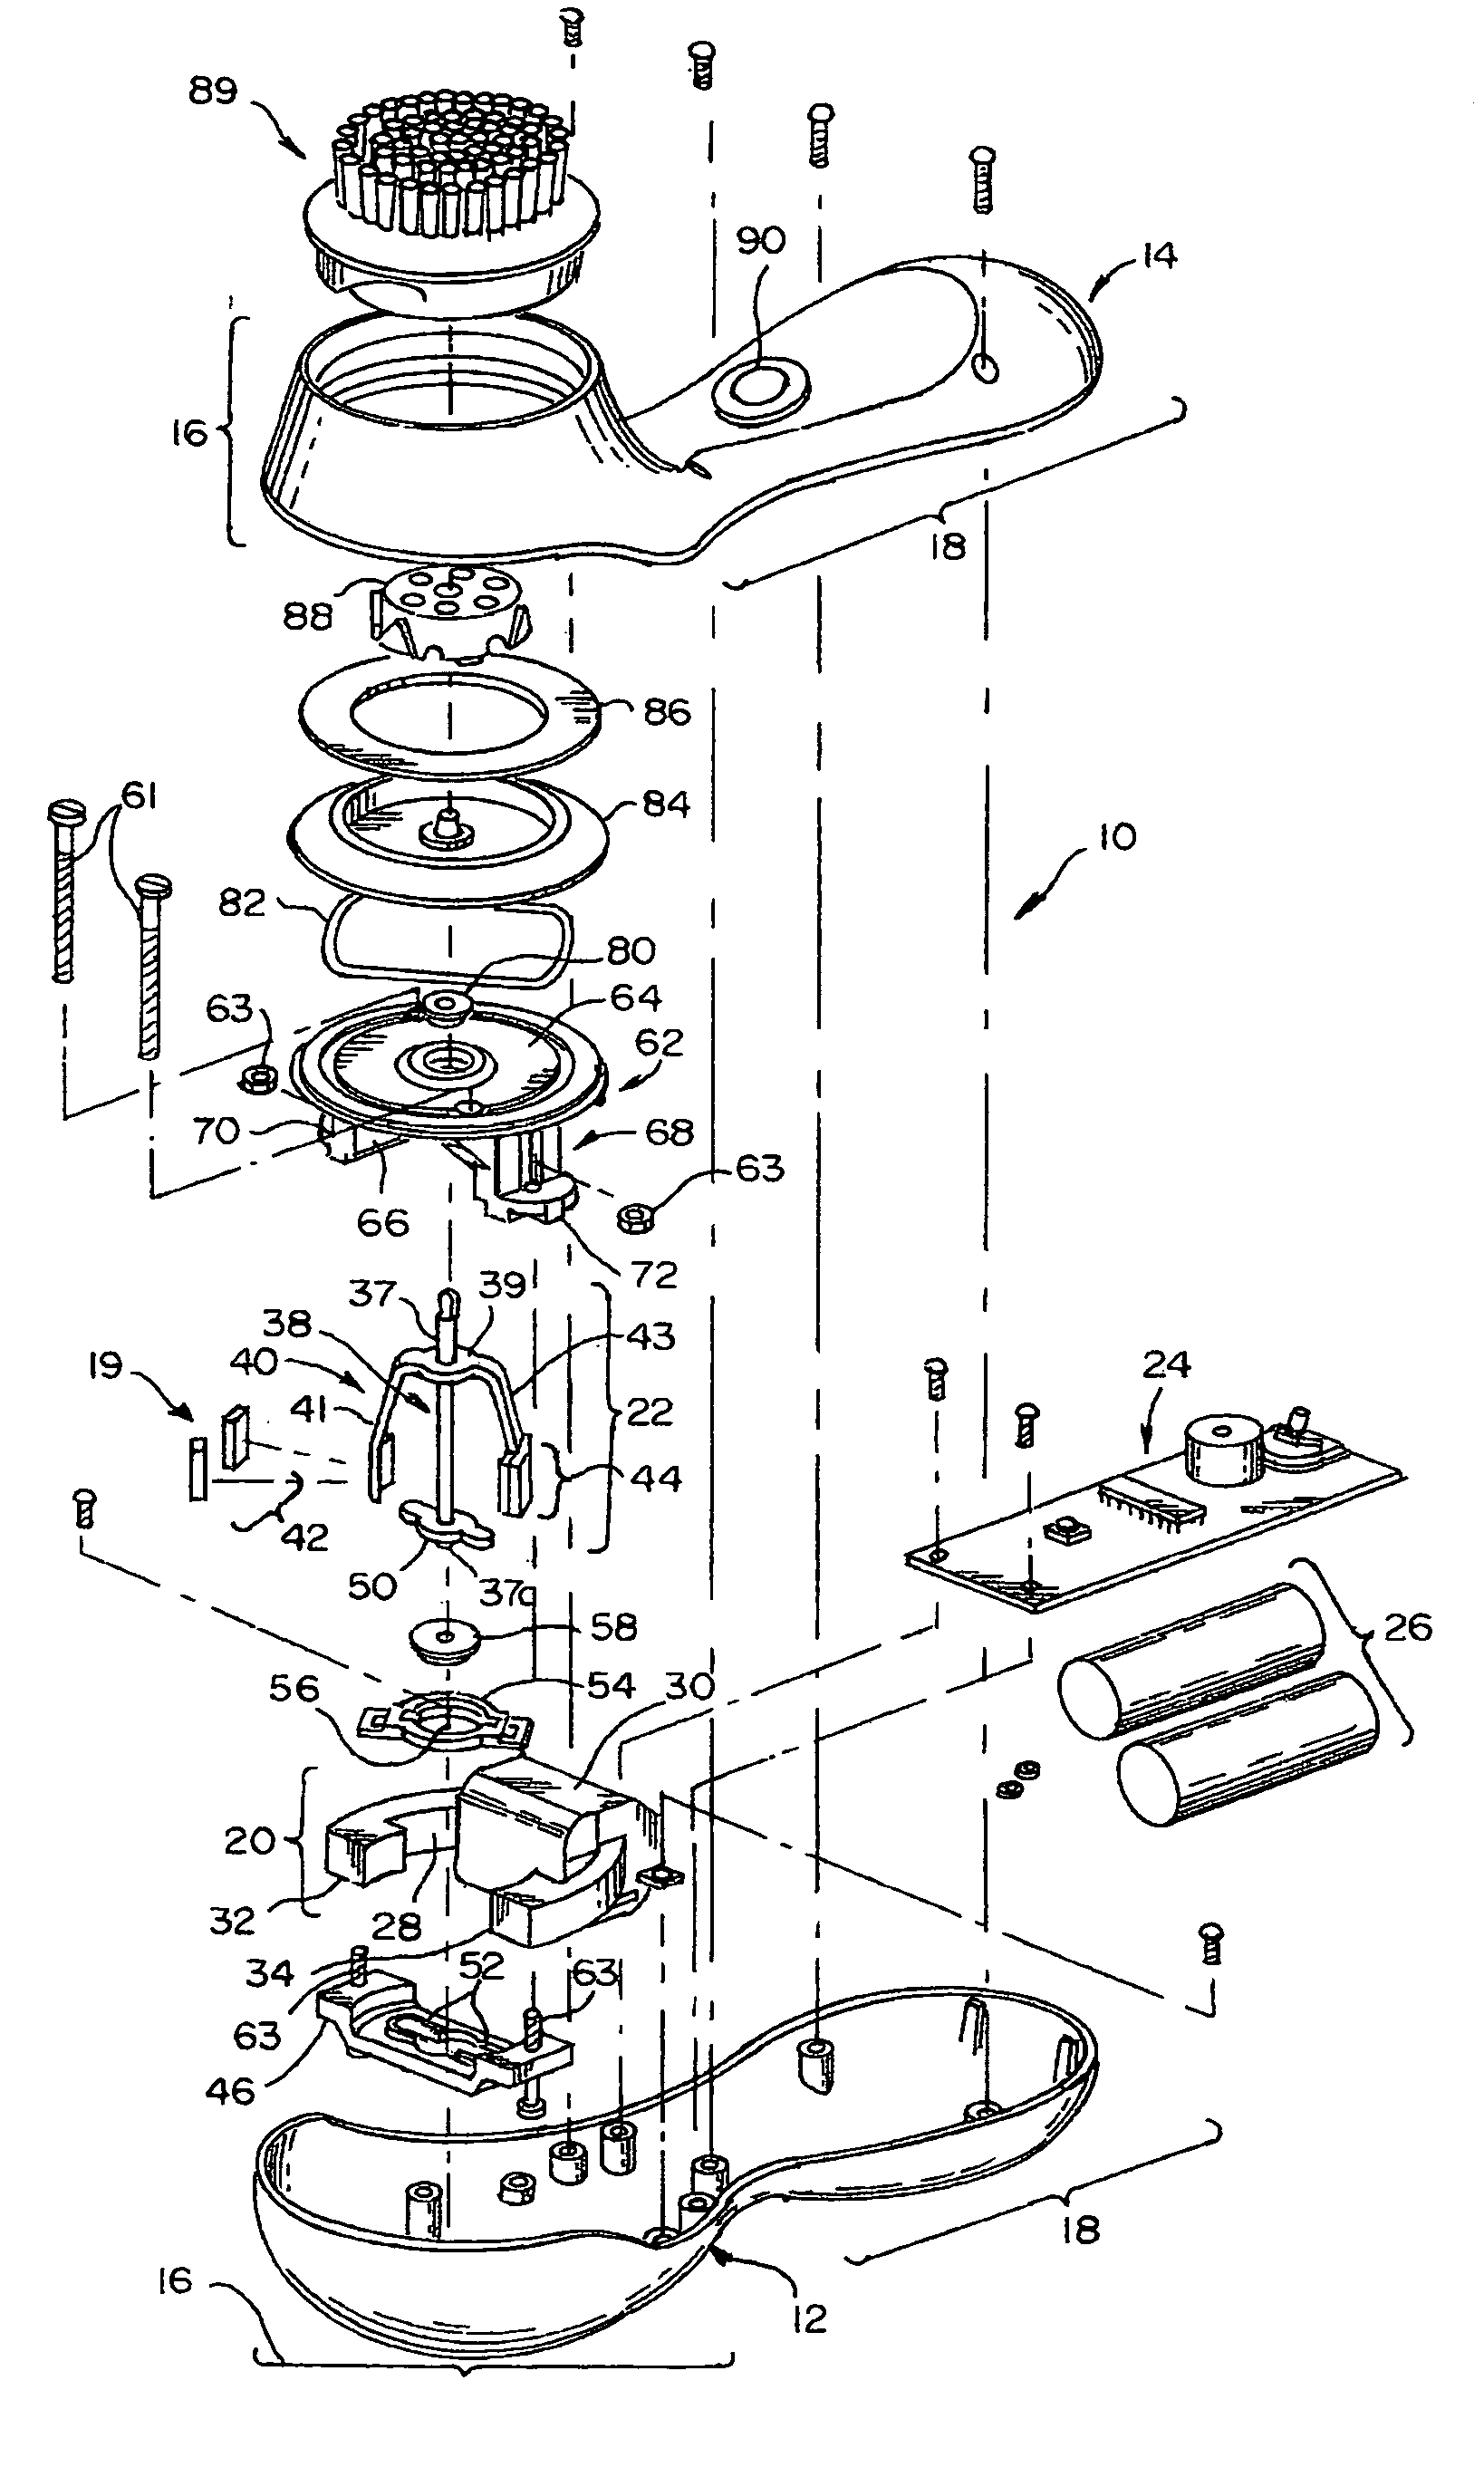 Motor providing oscillating action for a personal care appliance